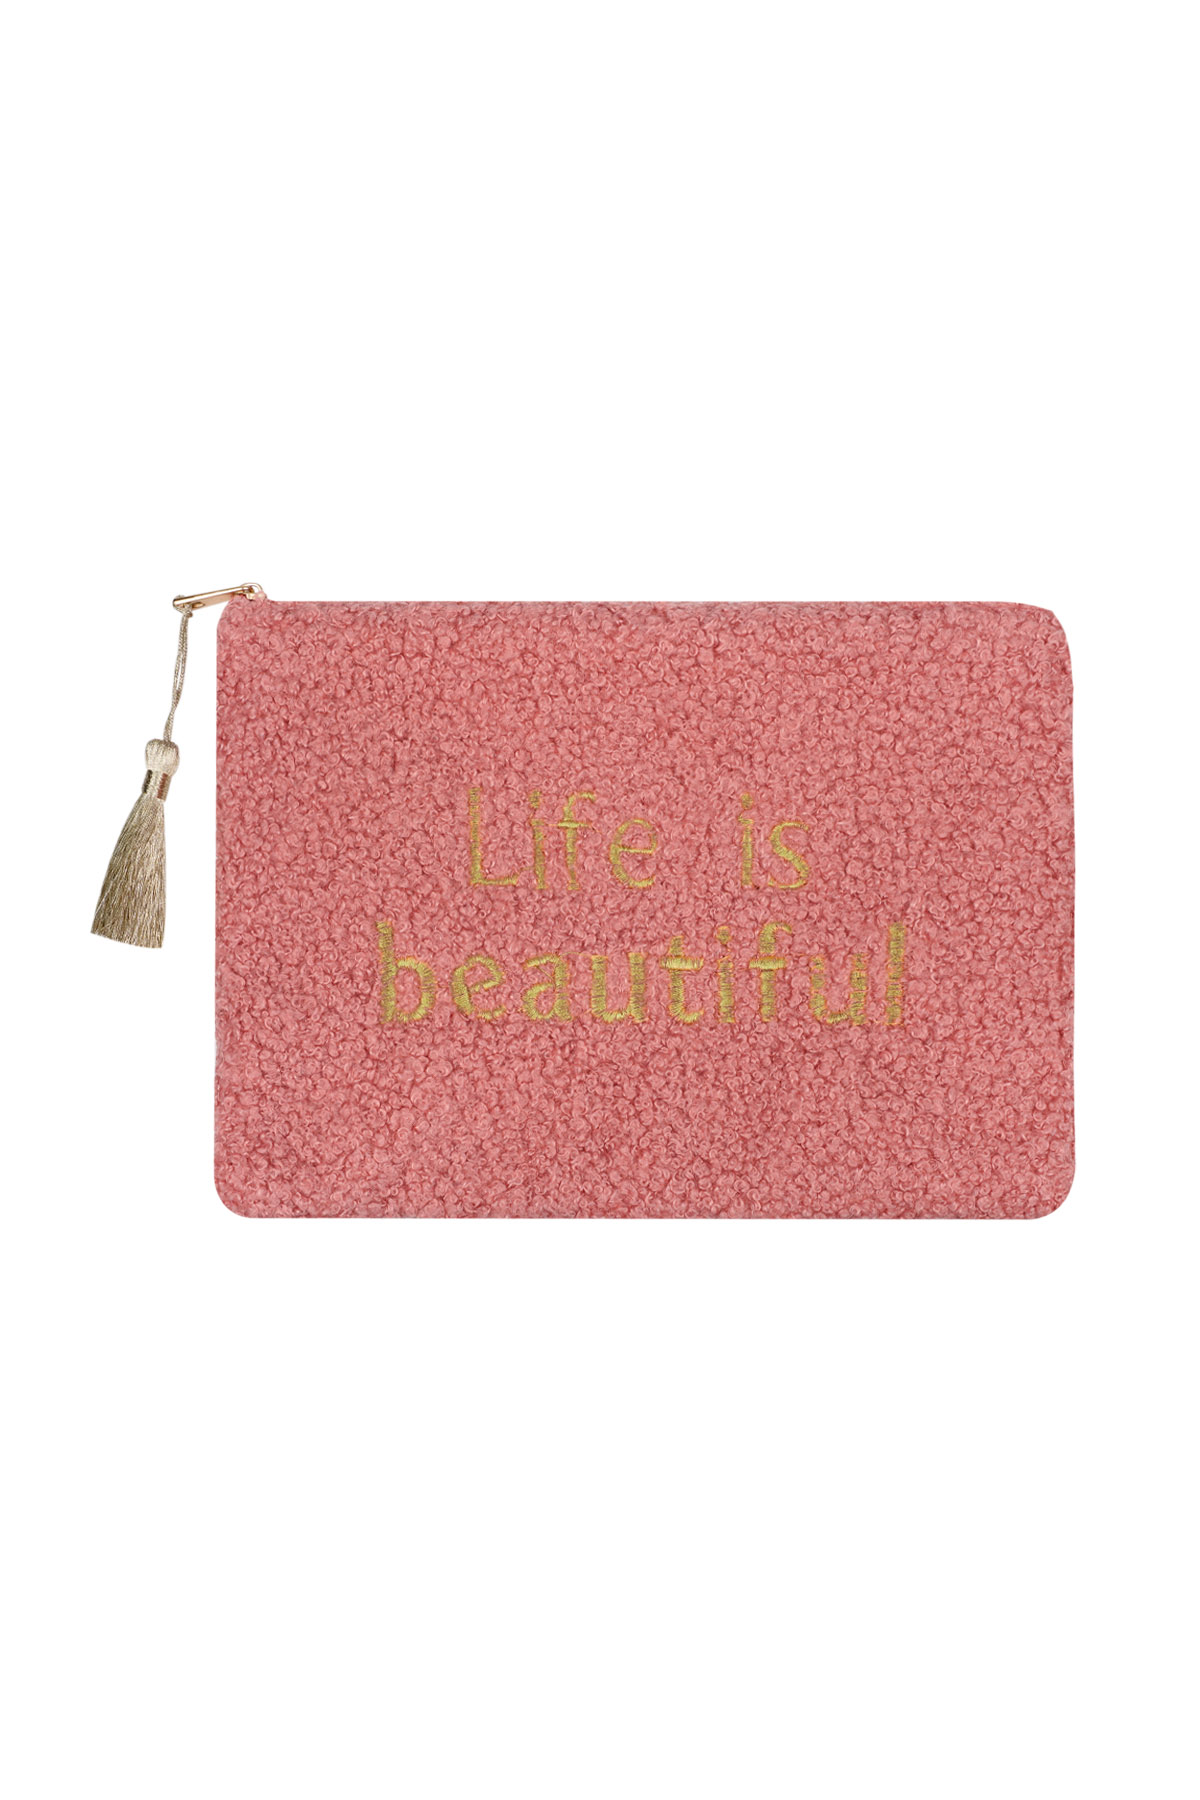 Make-up bag teddy life is beautiful rose h5 